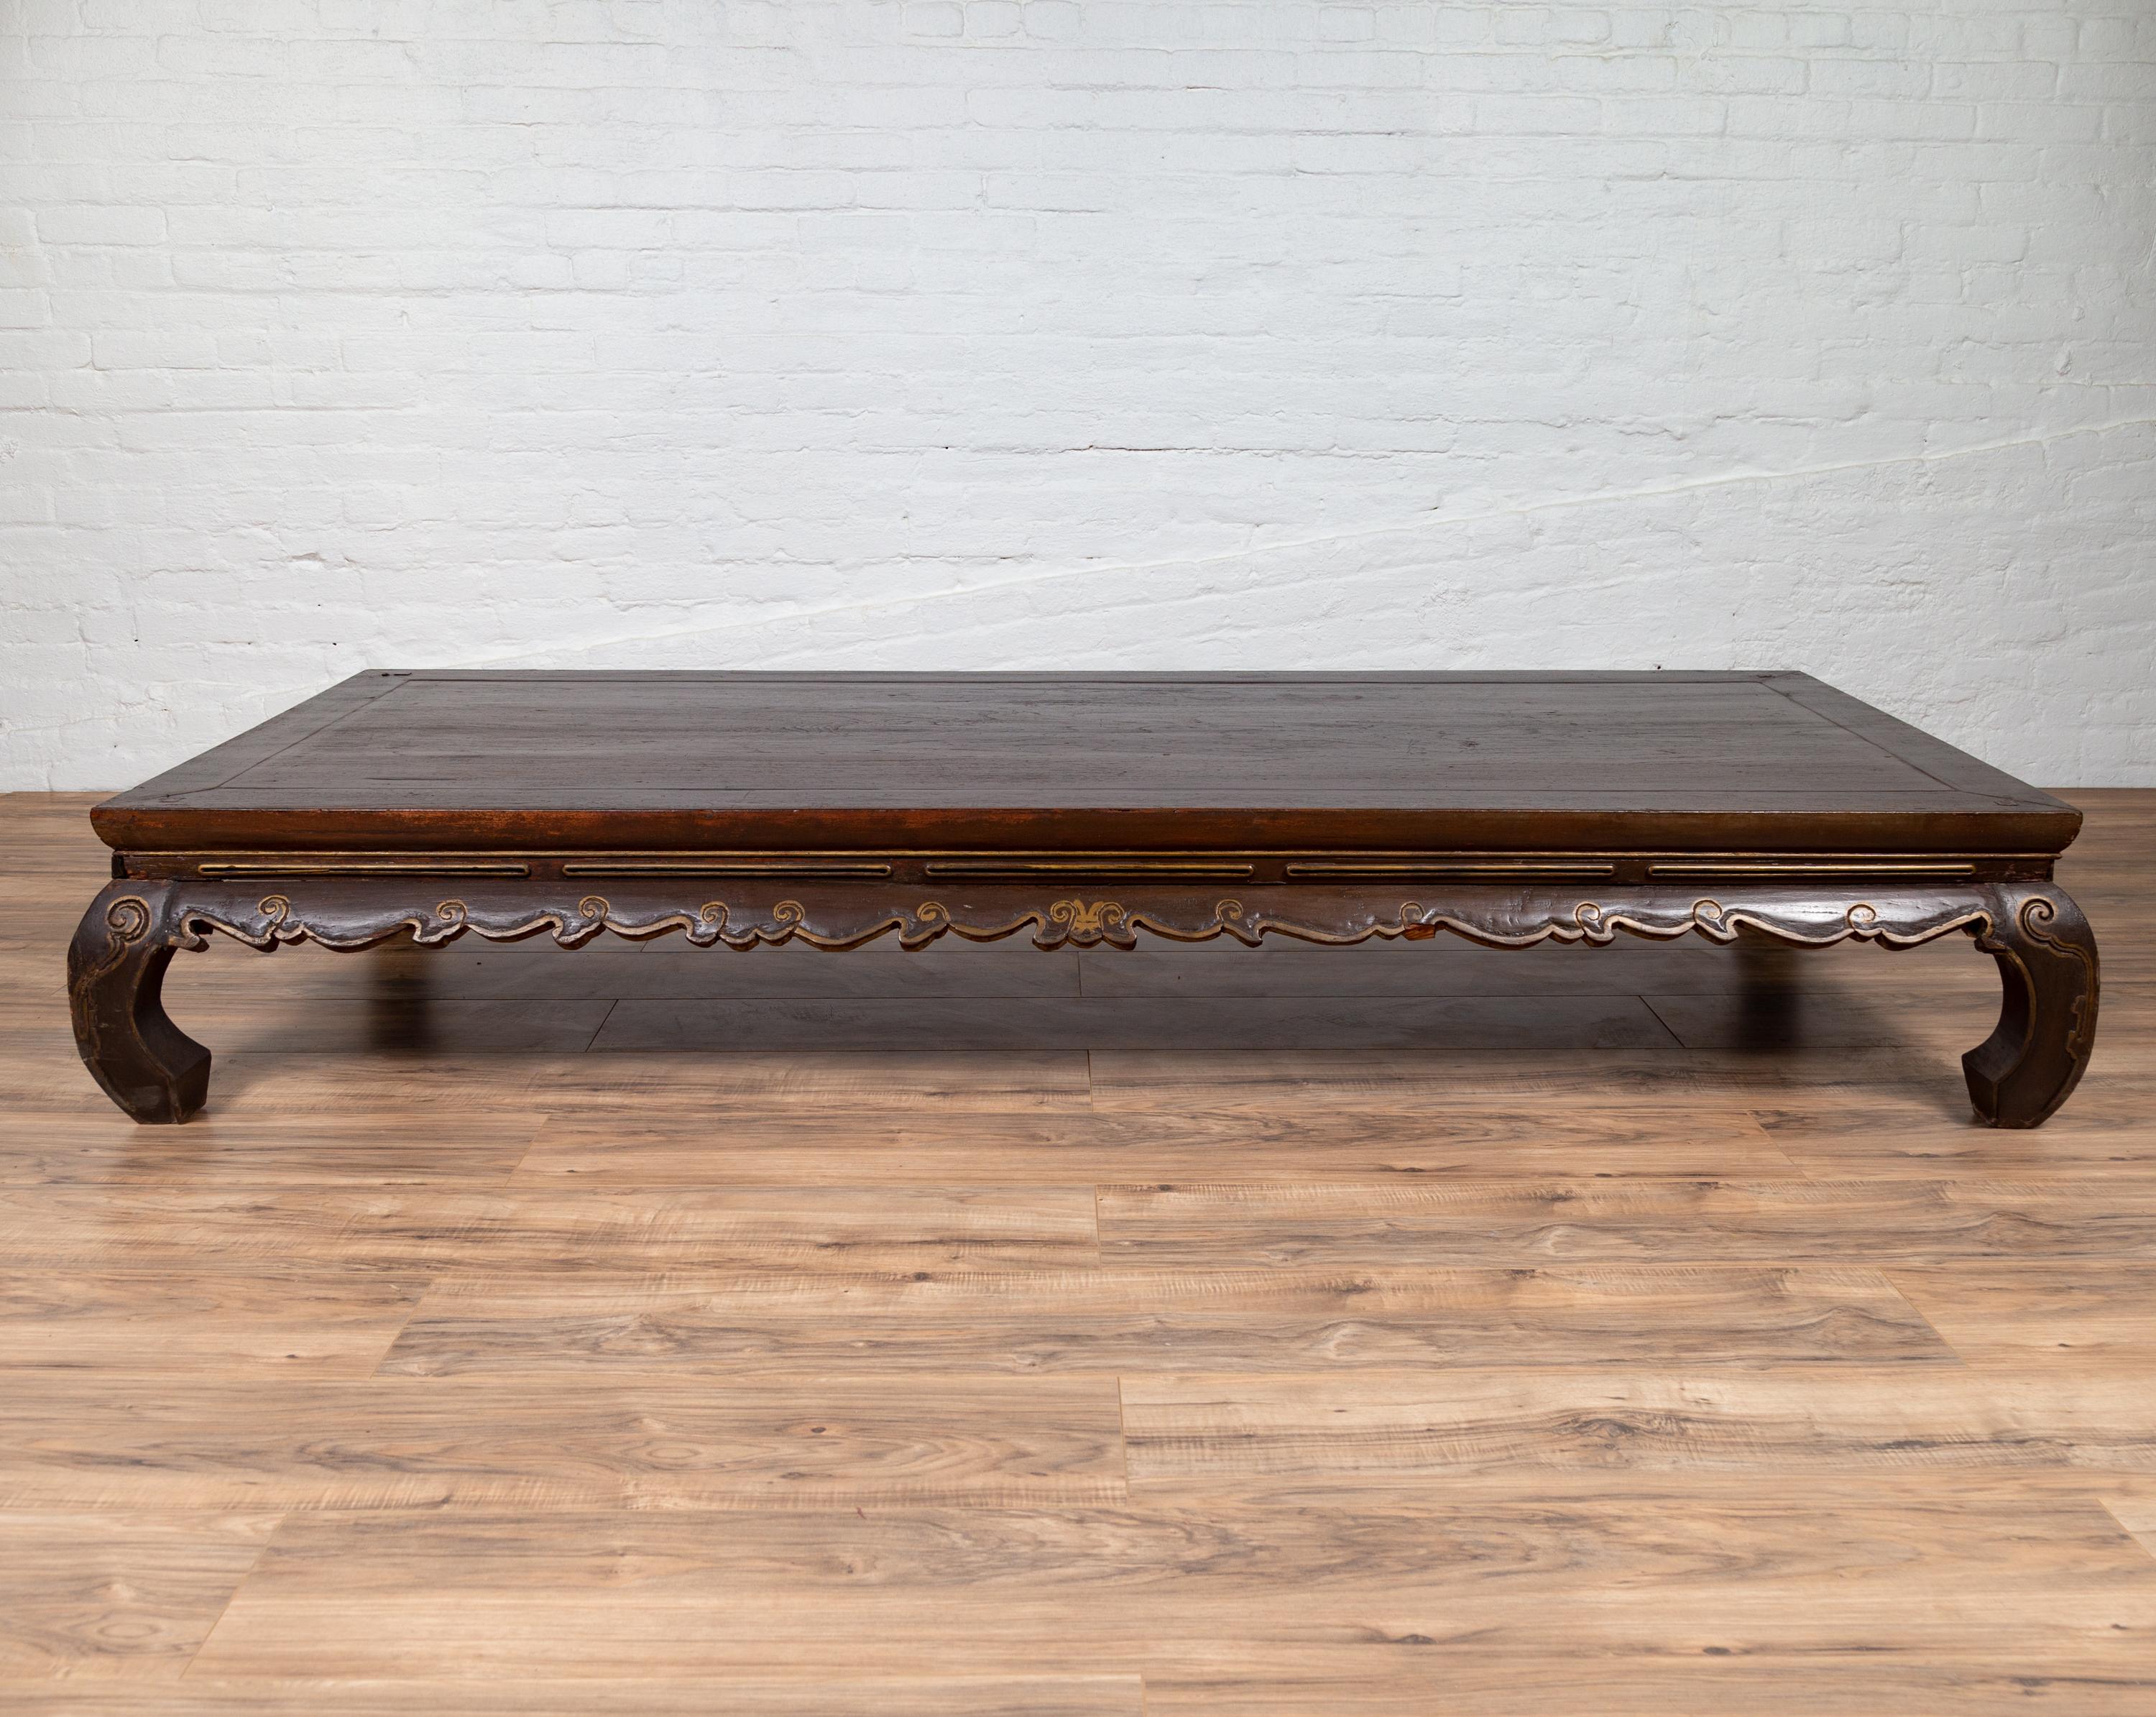 A large antique northern Chinese Ming Dynasty style kang opium bed from the early 20th century, with bulging chow legs and hand-carved frieze in scroll pattern. Born in China during the early years of the 20th century, this exquisite opium bed could